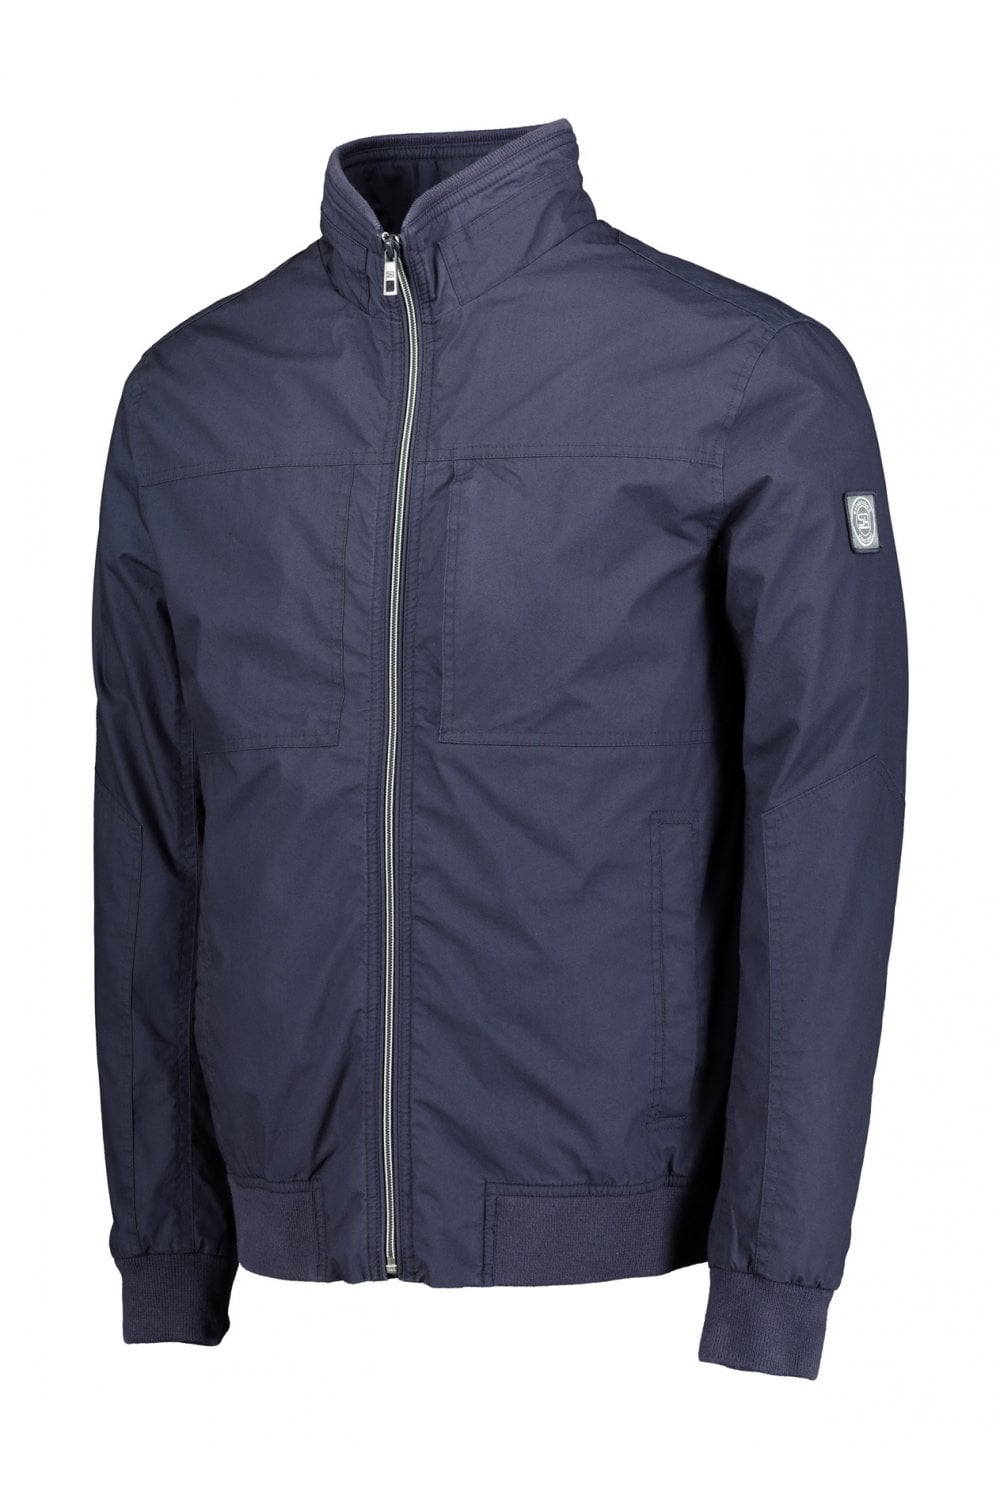 Navy cotton jacket with zip and two big pockets from German brand S4 available at StylishGuy Menswear Dublin